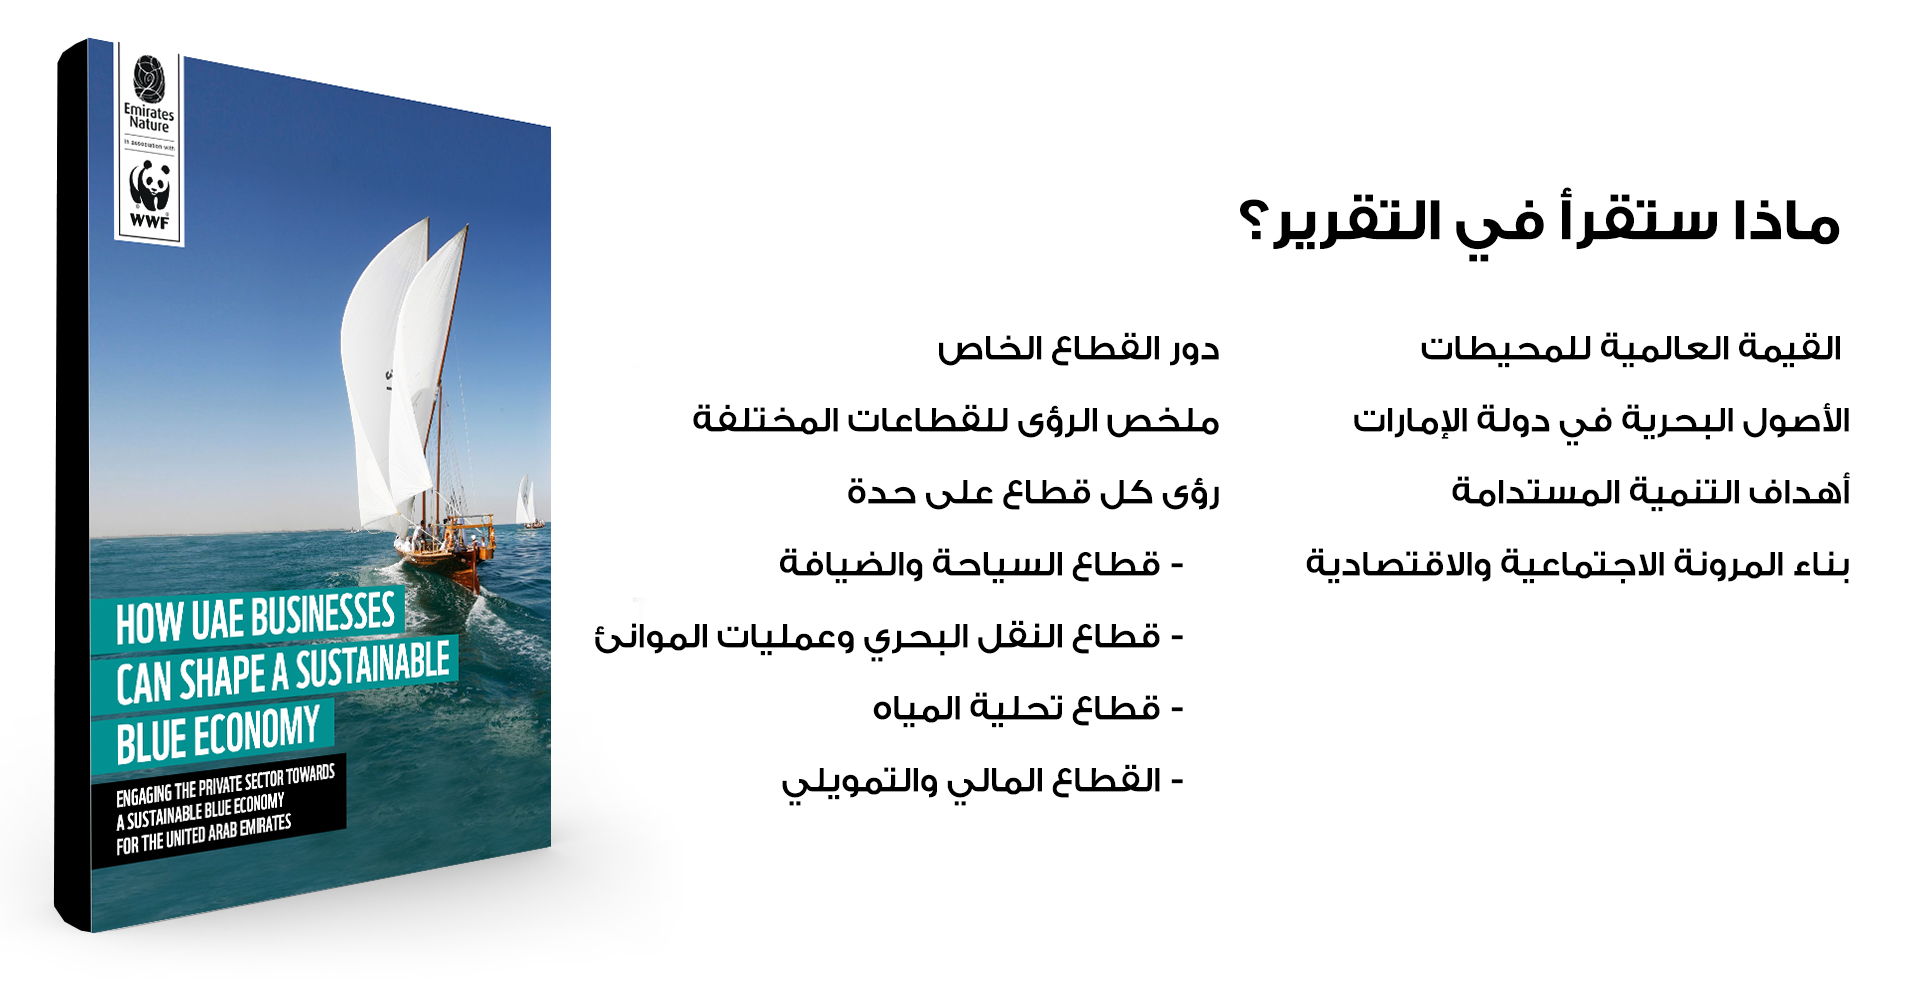 UAE's Sustainable Blue Economy Report - What is inside?